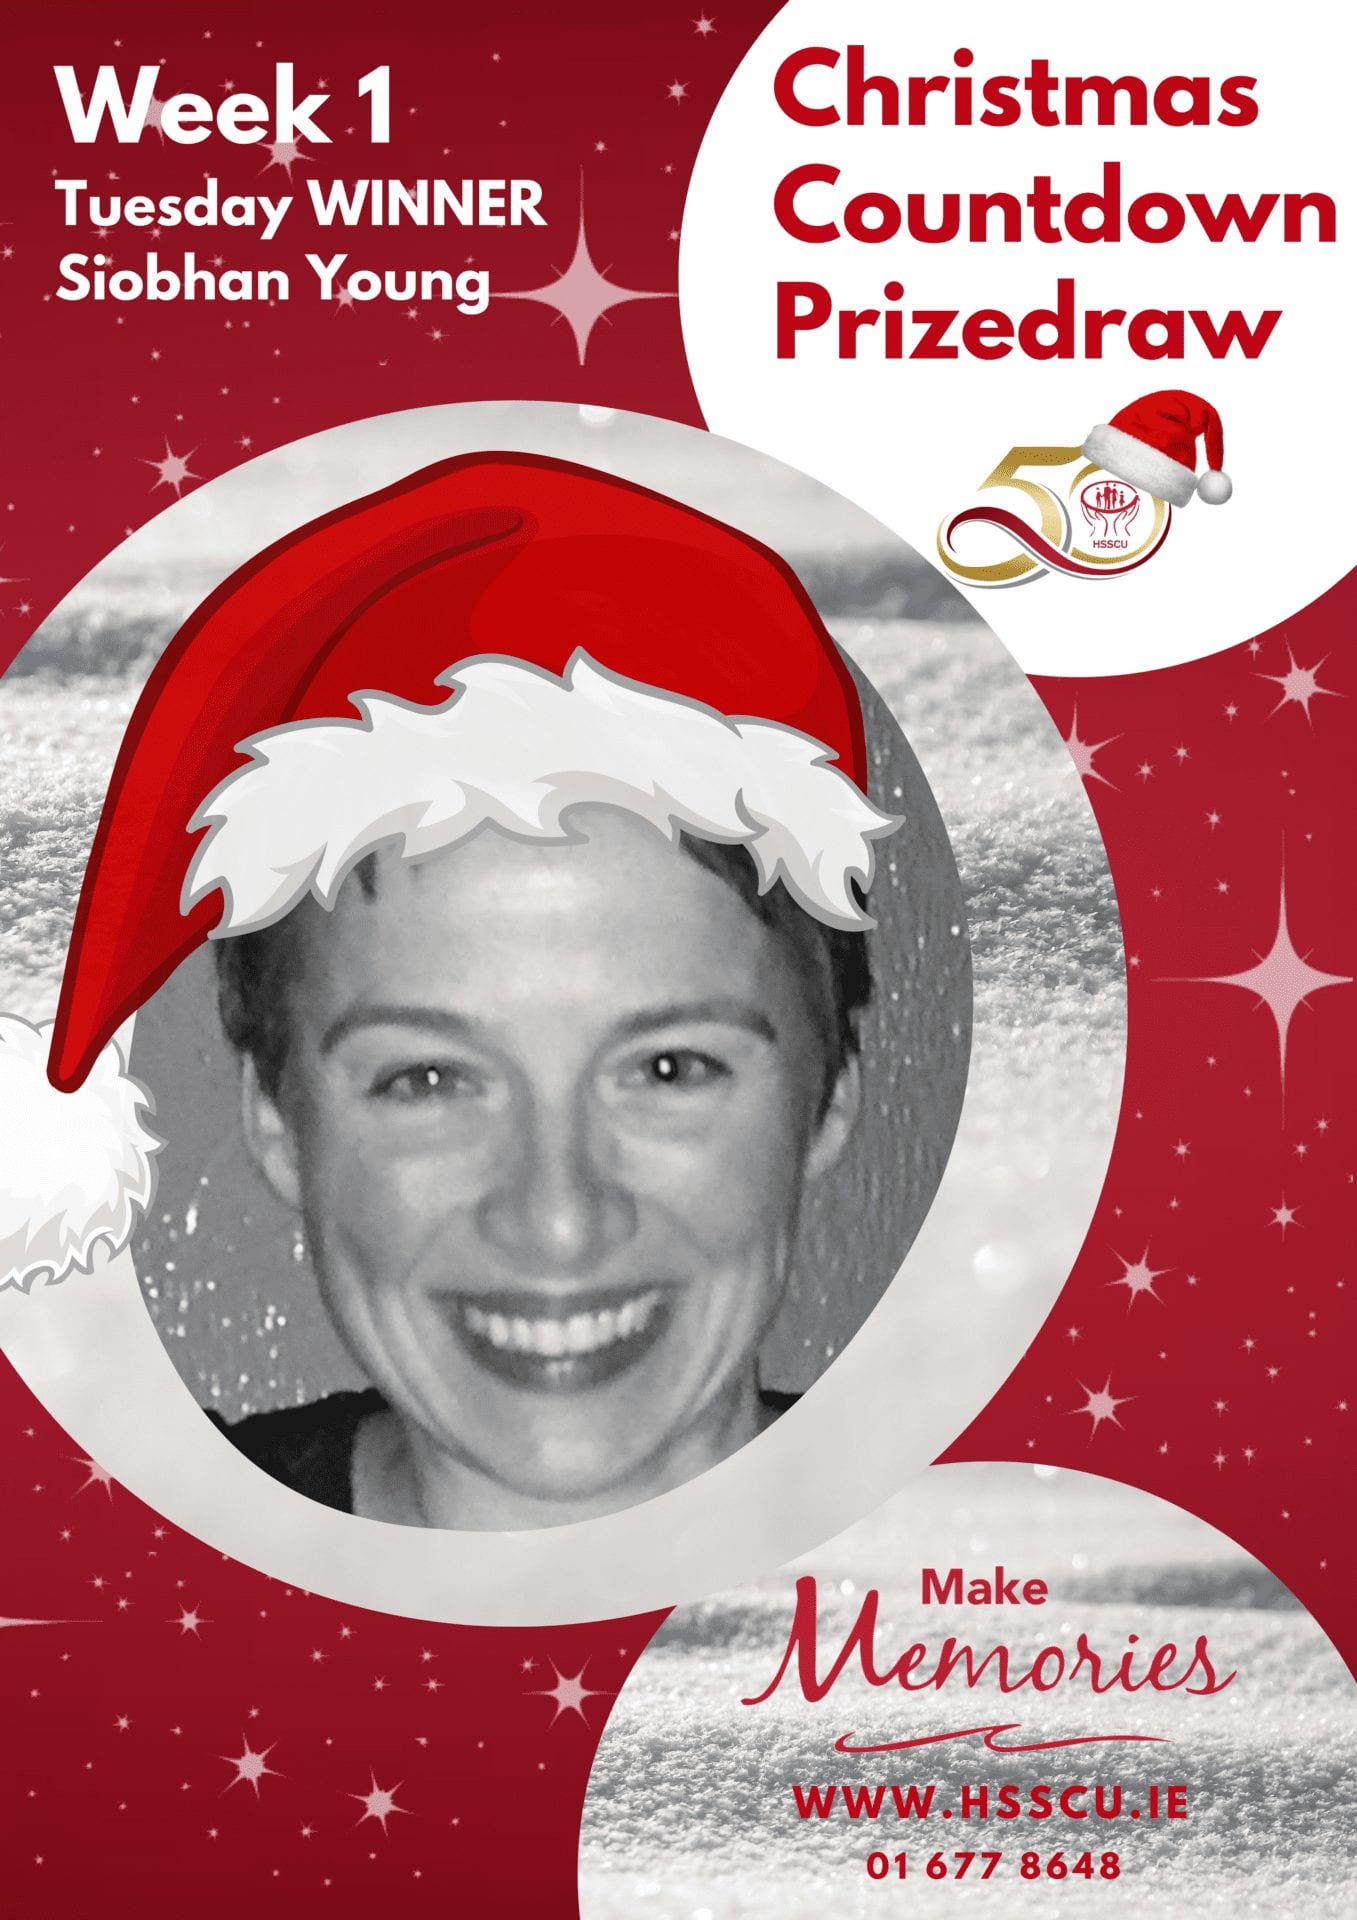 Siobhan Young - HSSCU Christmas Countdown Prize Draw Winner